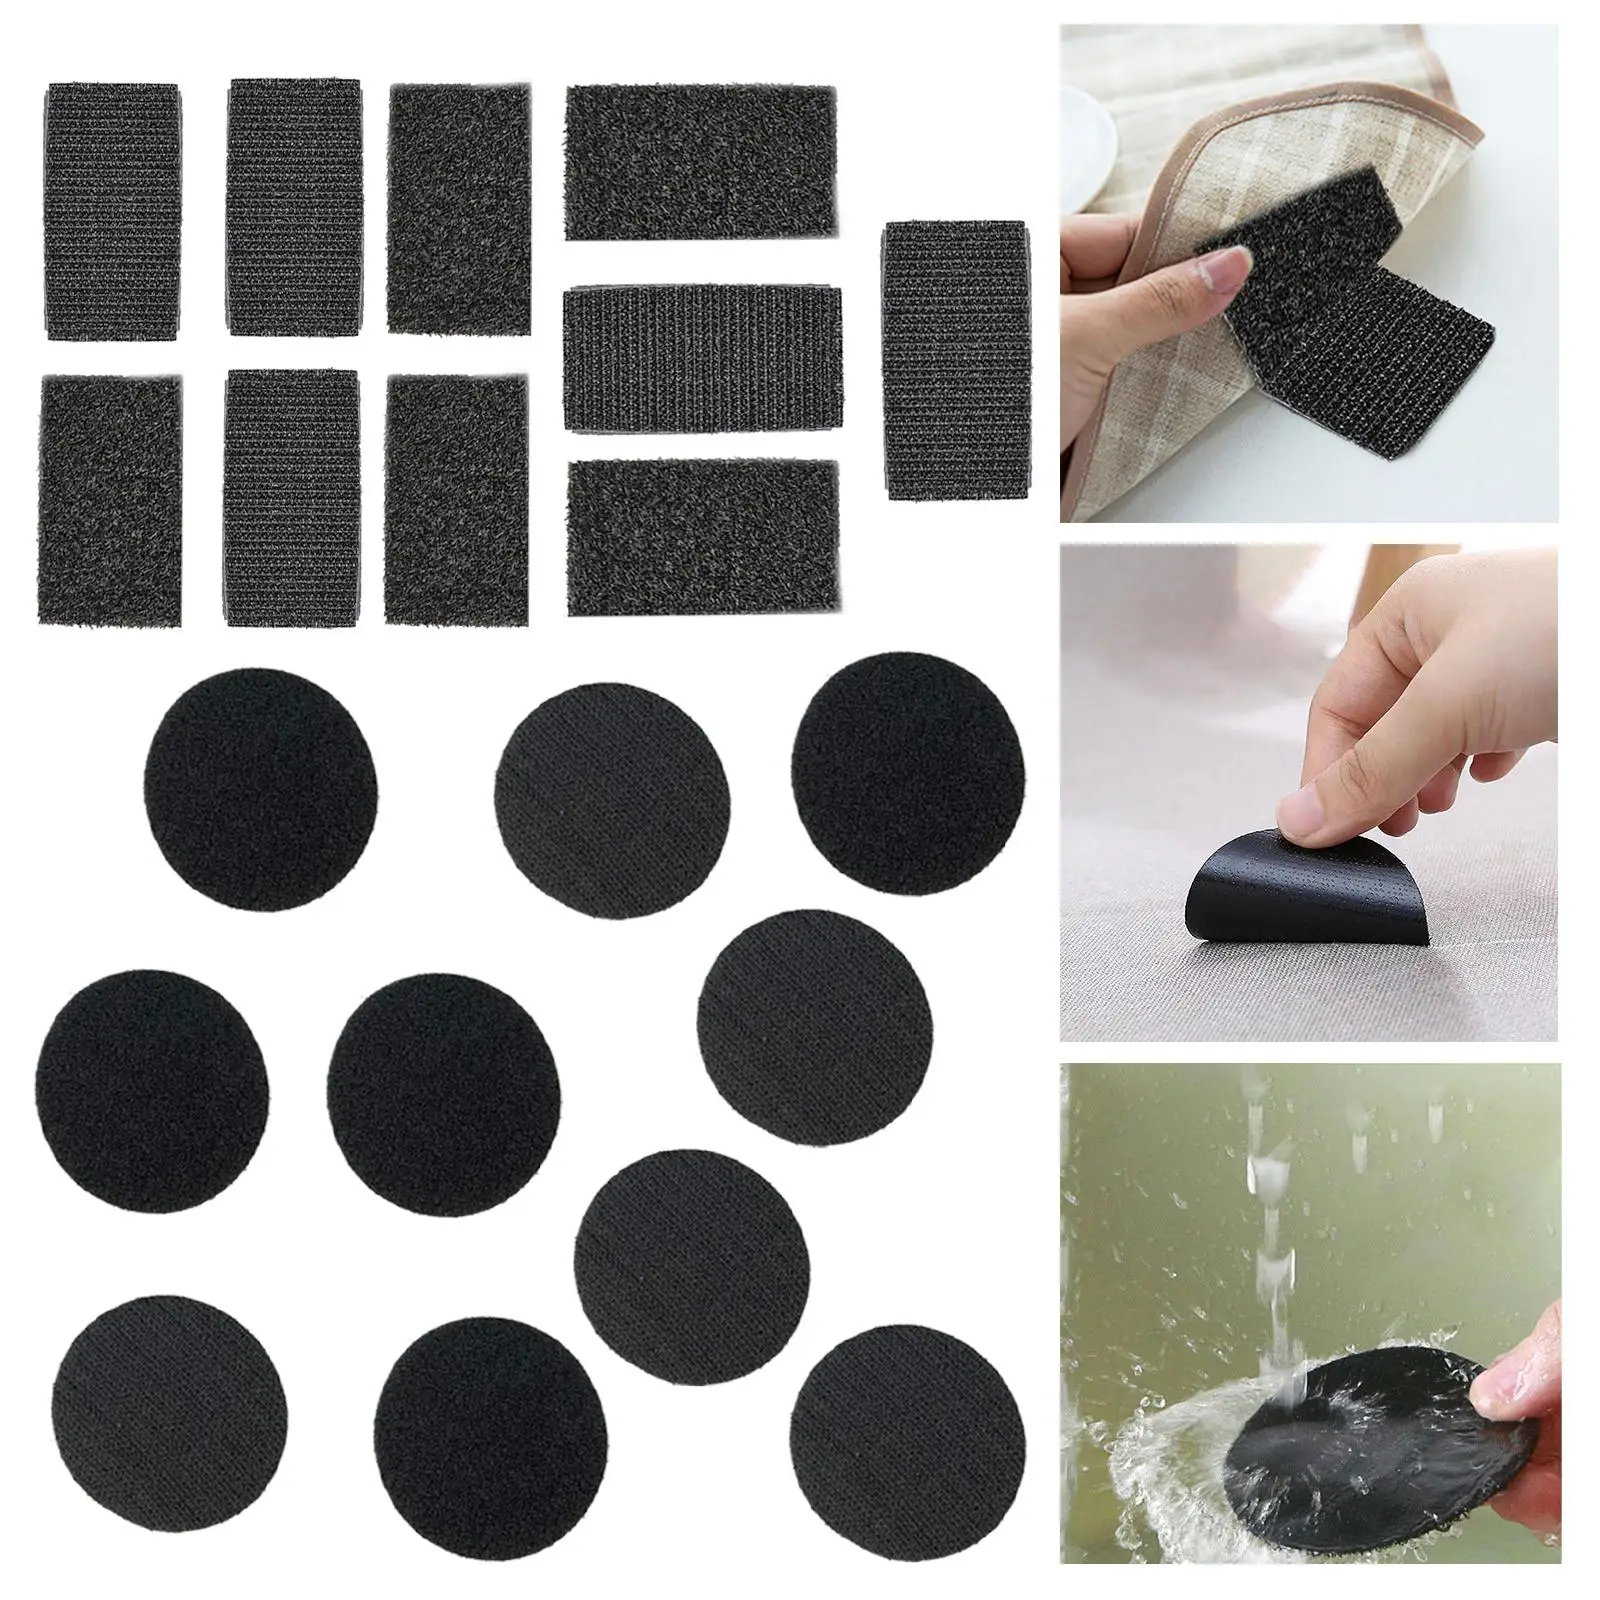 10Pcs Double Sided Adhesive Pads Washable Reusable Sticky Fixator for Bed Sheet Household Carpet Chairs Cushion Home Office